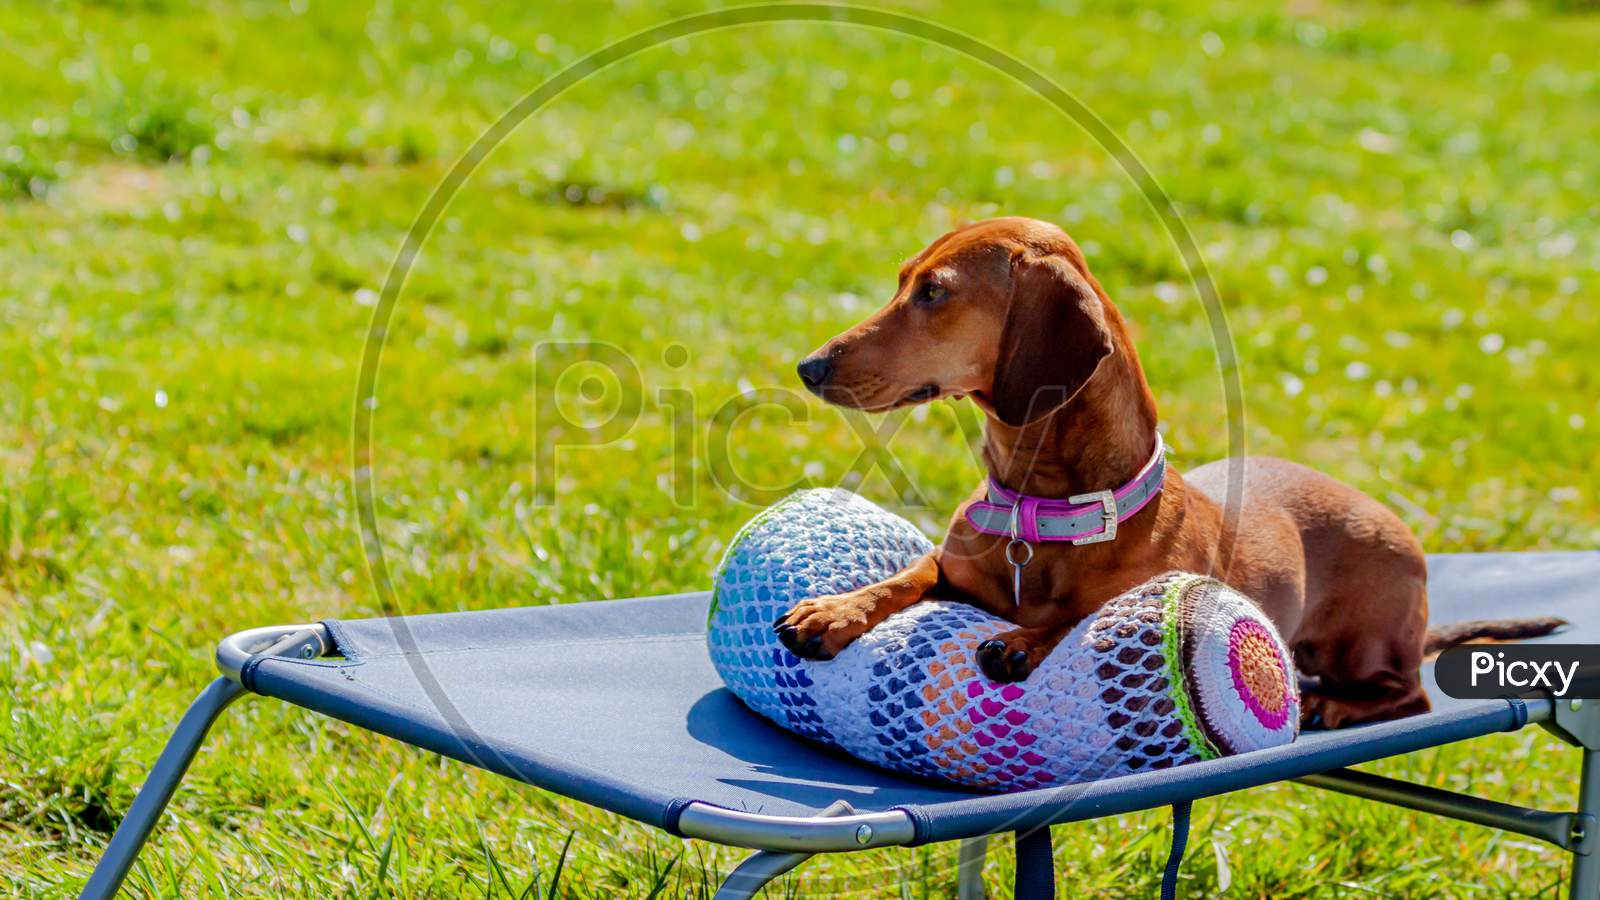 Beautiful Brown Dachshund Looking And Sitting Comfortably In A Sunbathing Lounge Chair In A Garden With Green Grass, Beautiful And Sunny Spring Day In Oensel South Limburg In The Netherlands